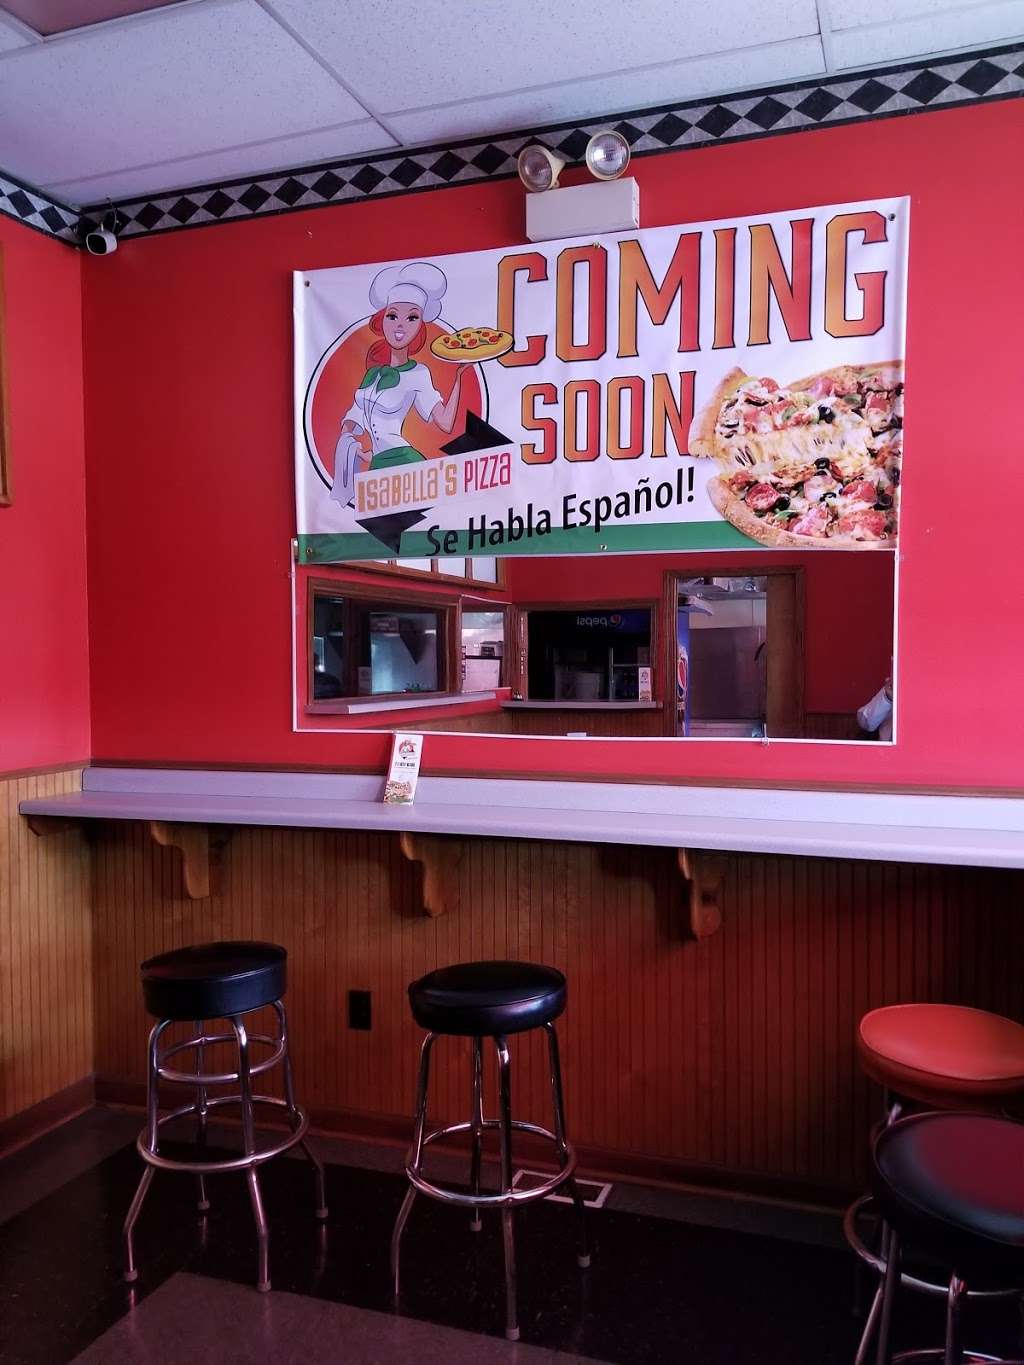 Isabellas Pizza | 1932 Calumet Ave, Whiting, IN 46394 | Phone: (219) 659-6500